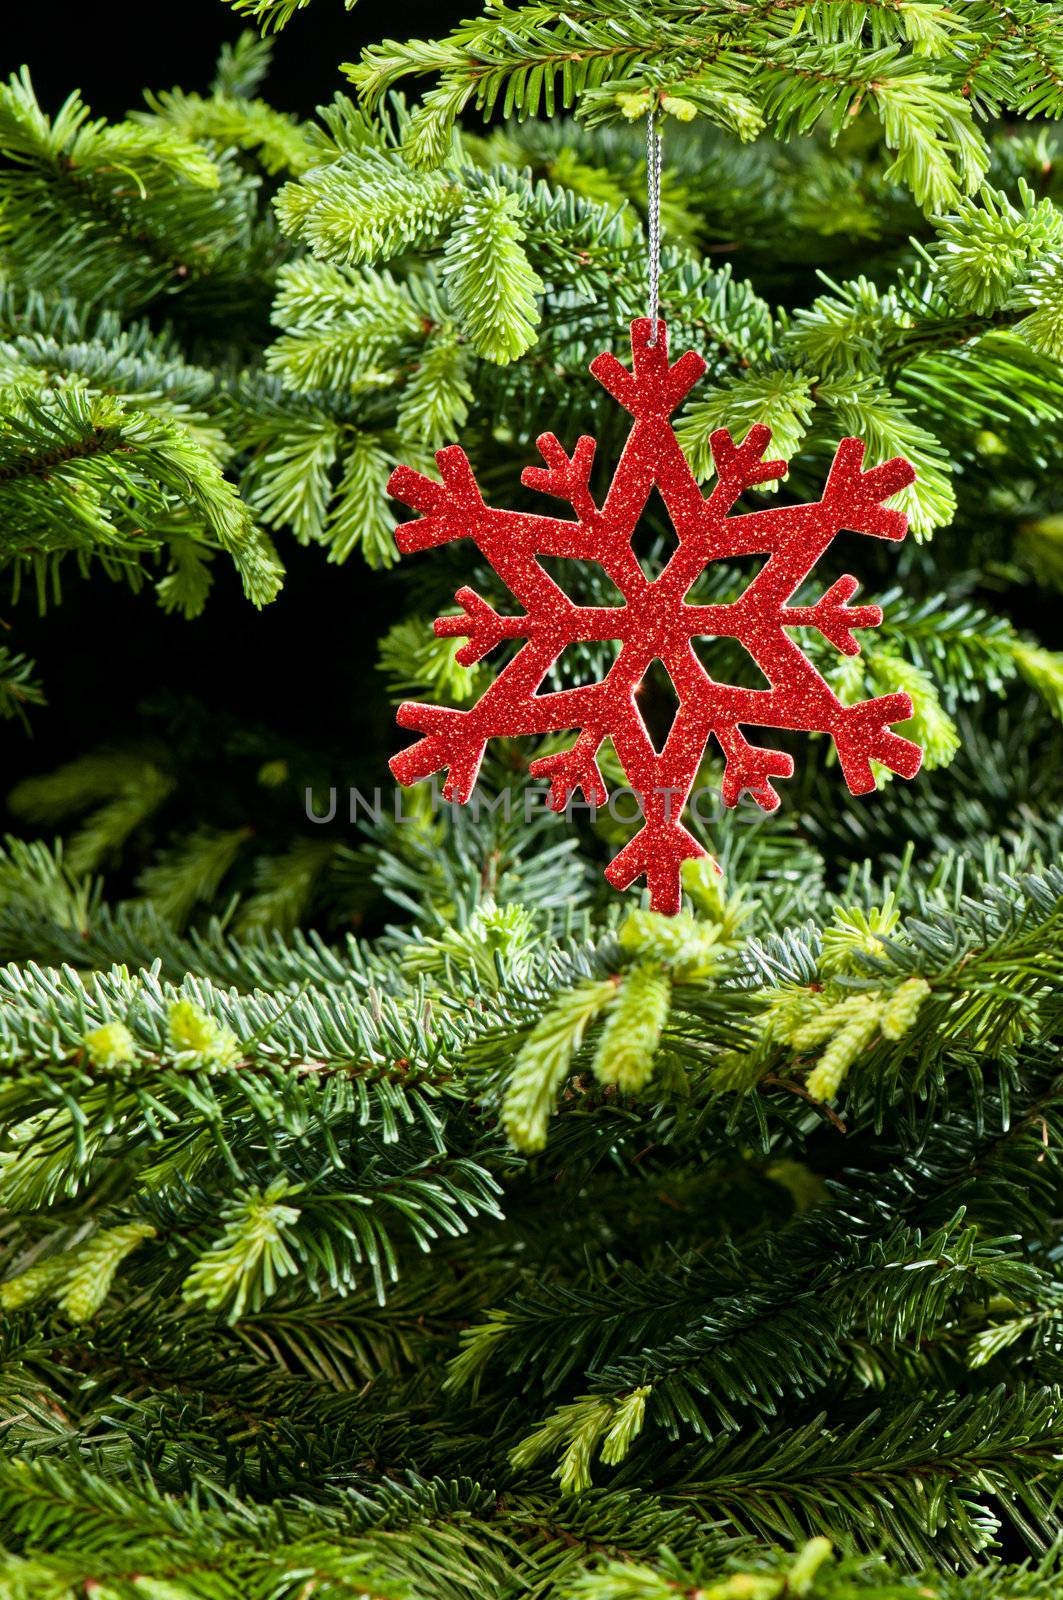 Red (artificial) snowflake ornament, in fresh pine Christmas tree